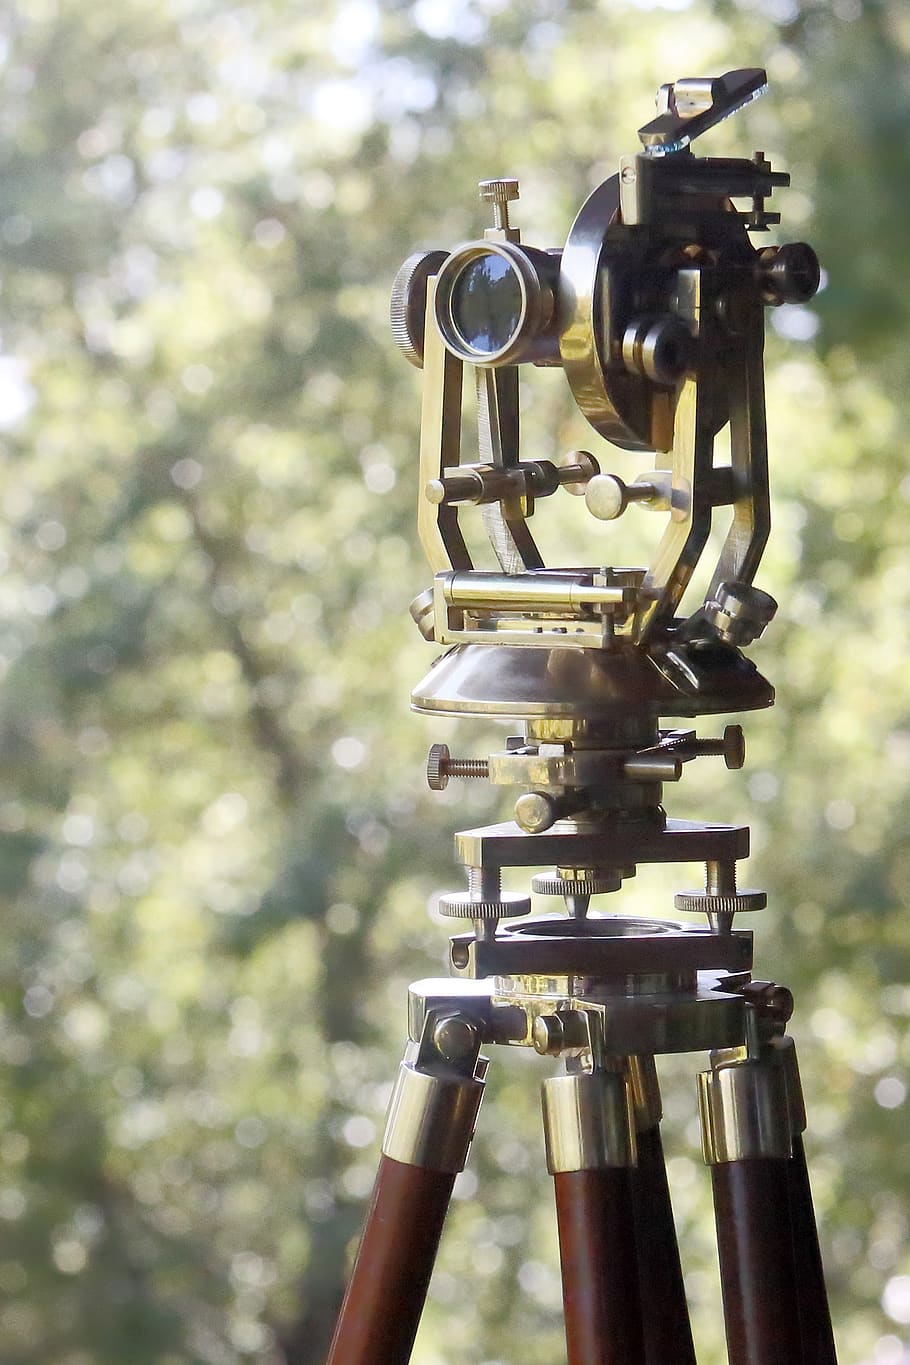 theodolite, technology, equipment, lens, industry, science, old, antique, transit, survey